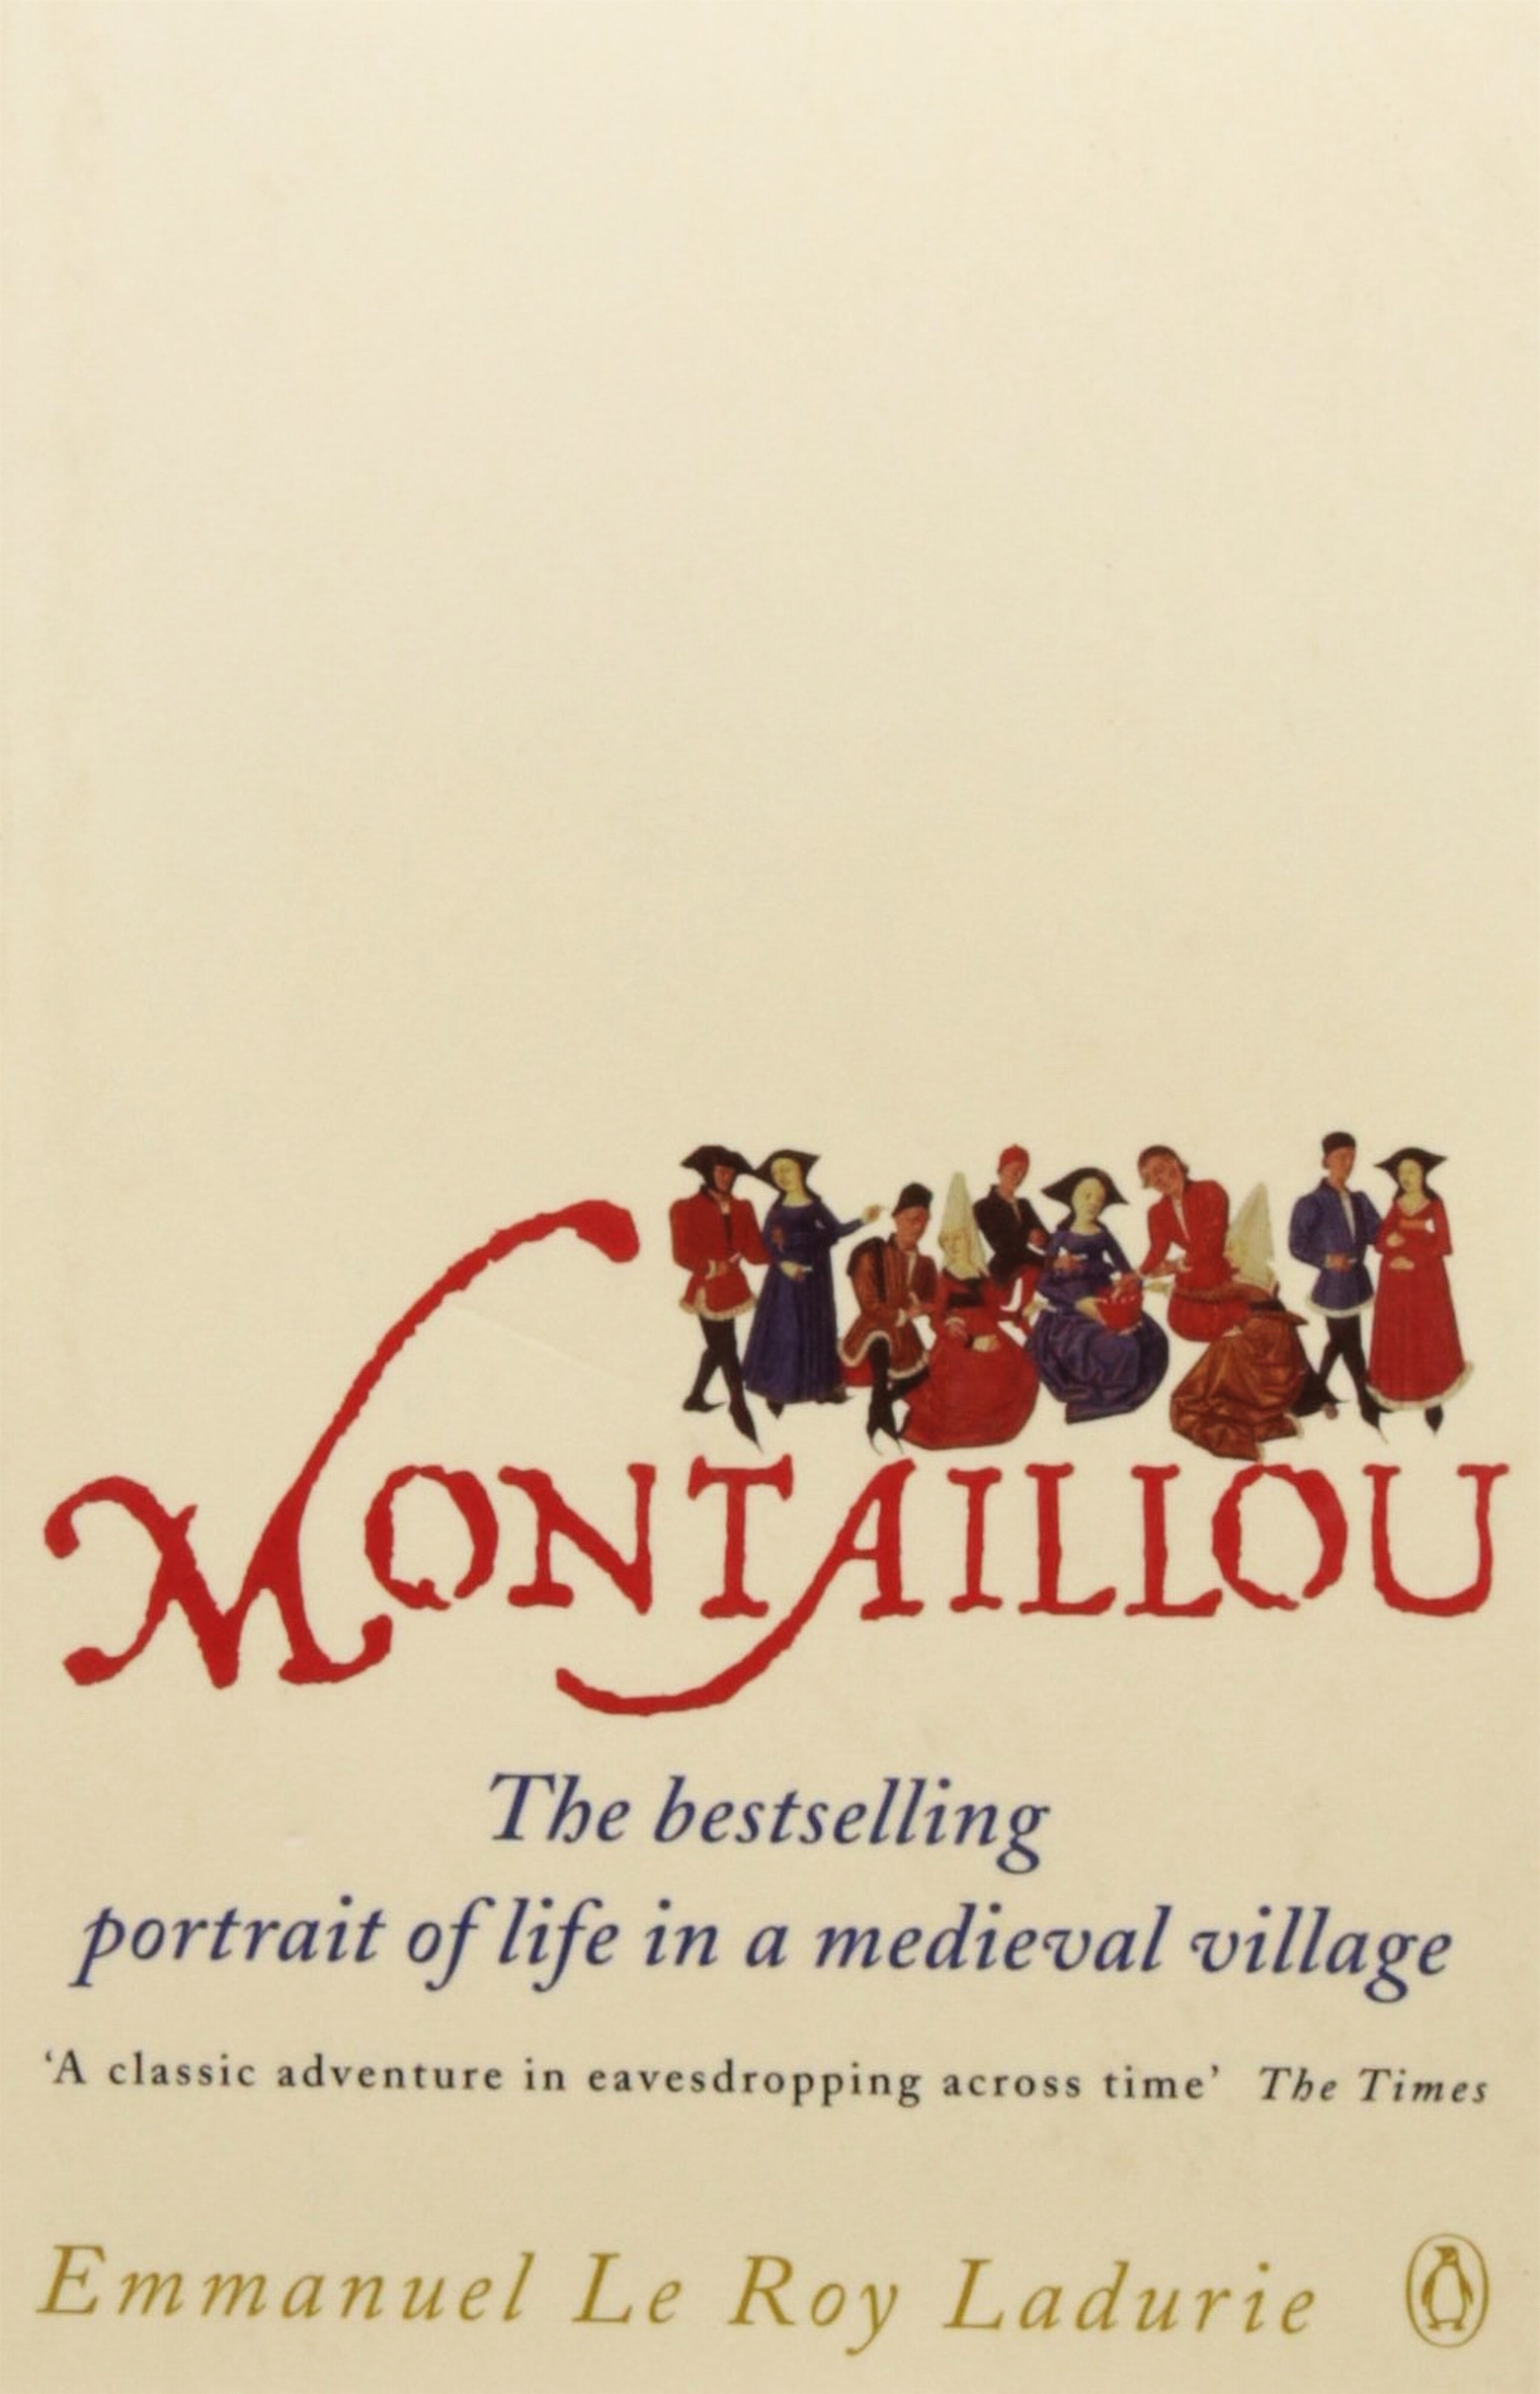 Montaillou Cathars and Catholics in a French Village 1294-1324 - image 3